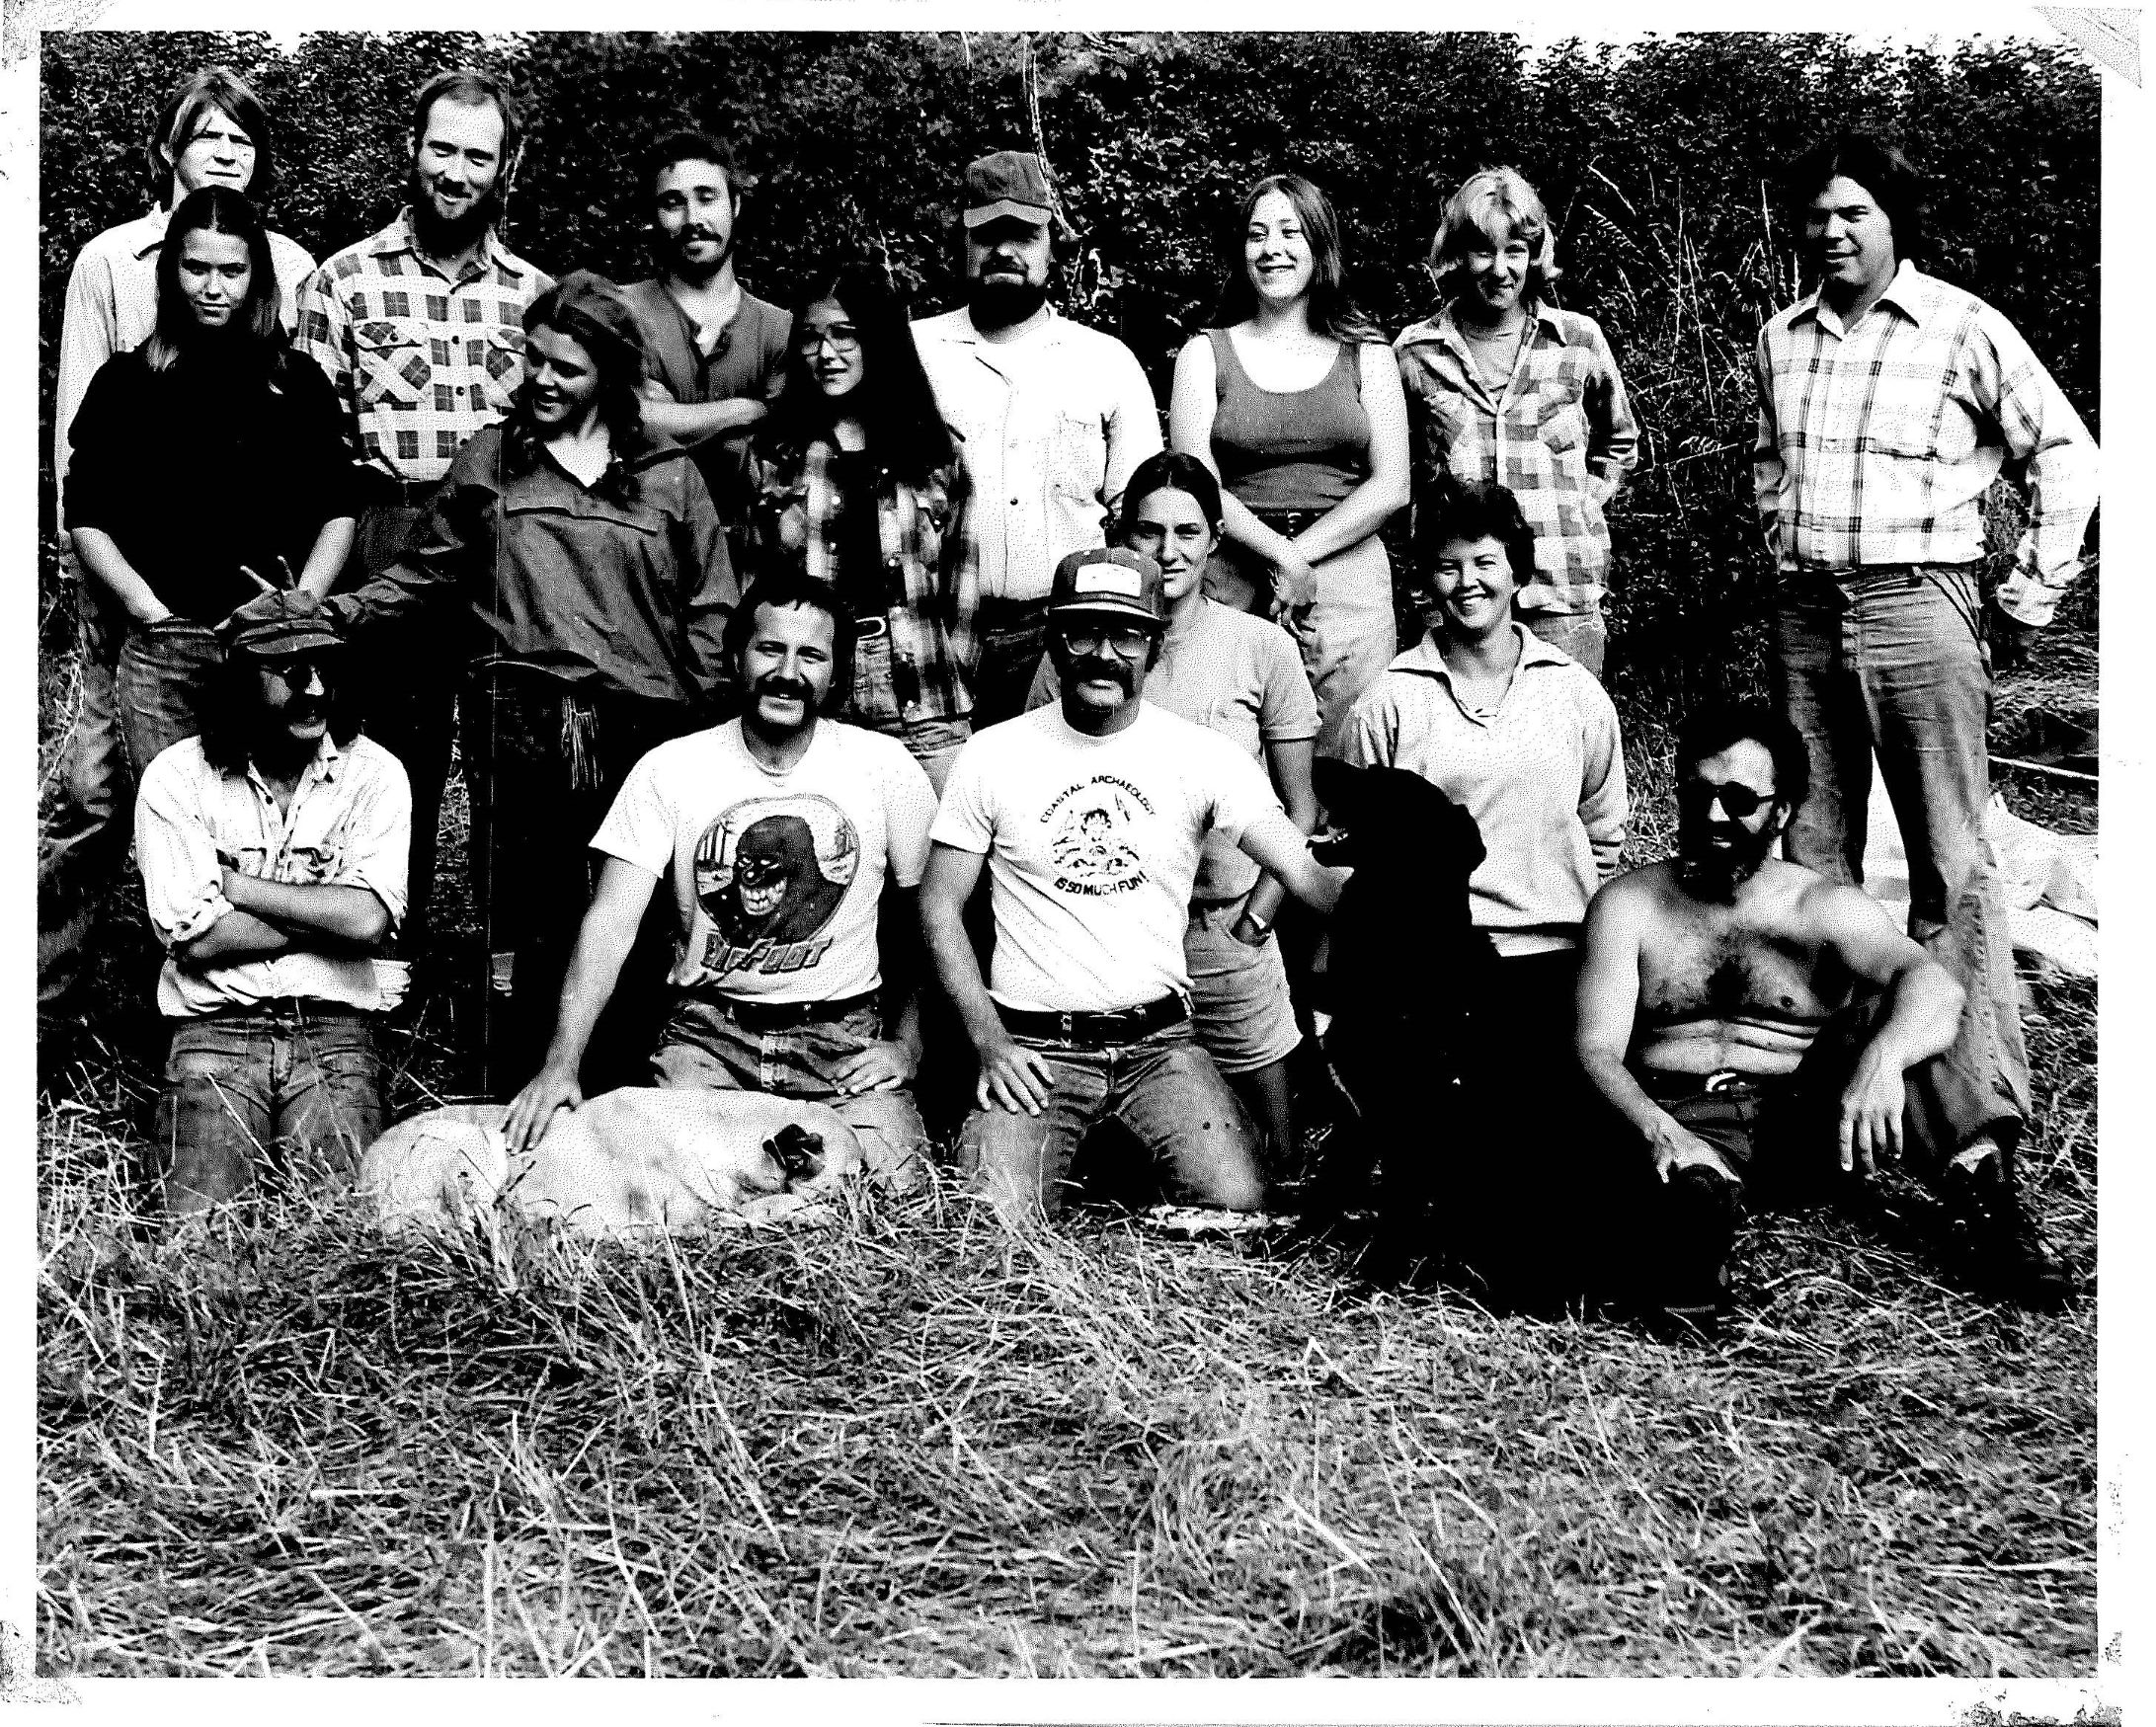 archaeology students and a black dog pose in a field circa 1970